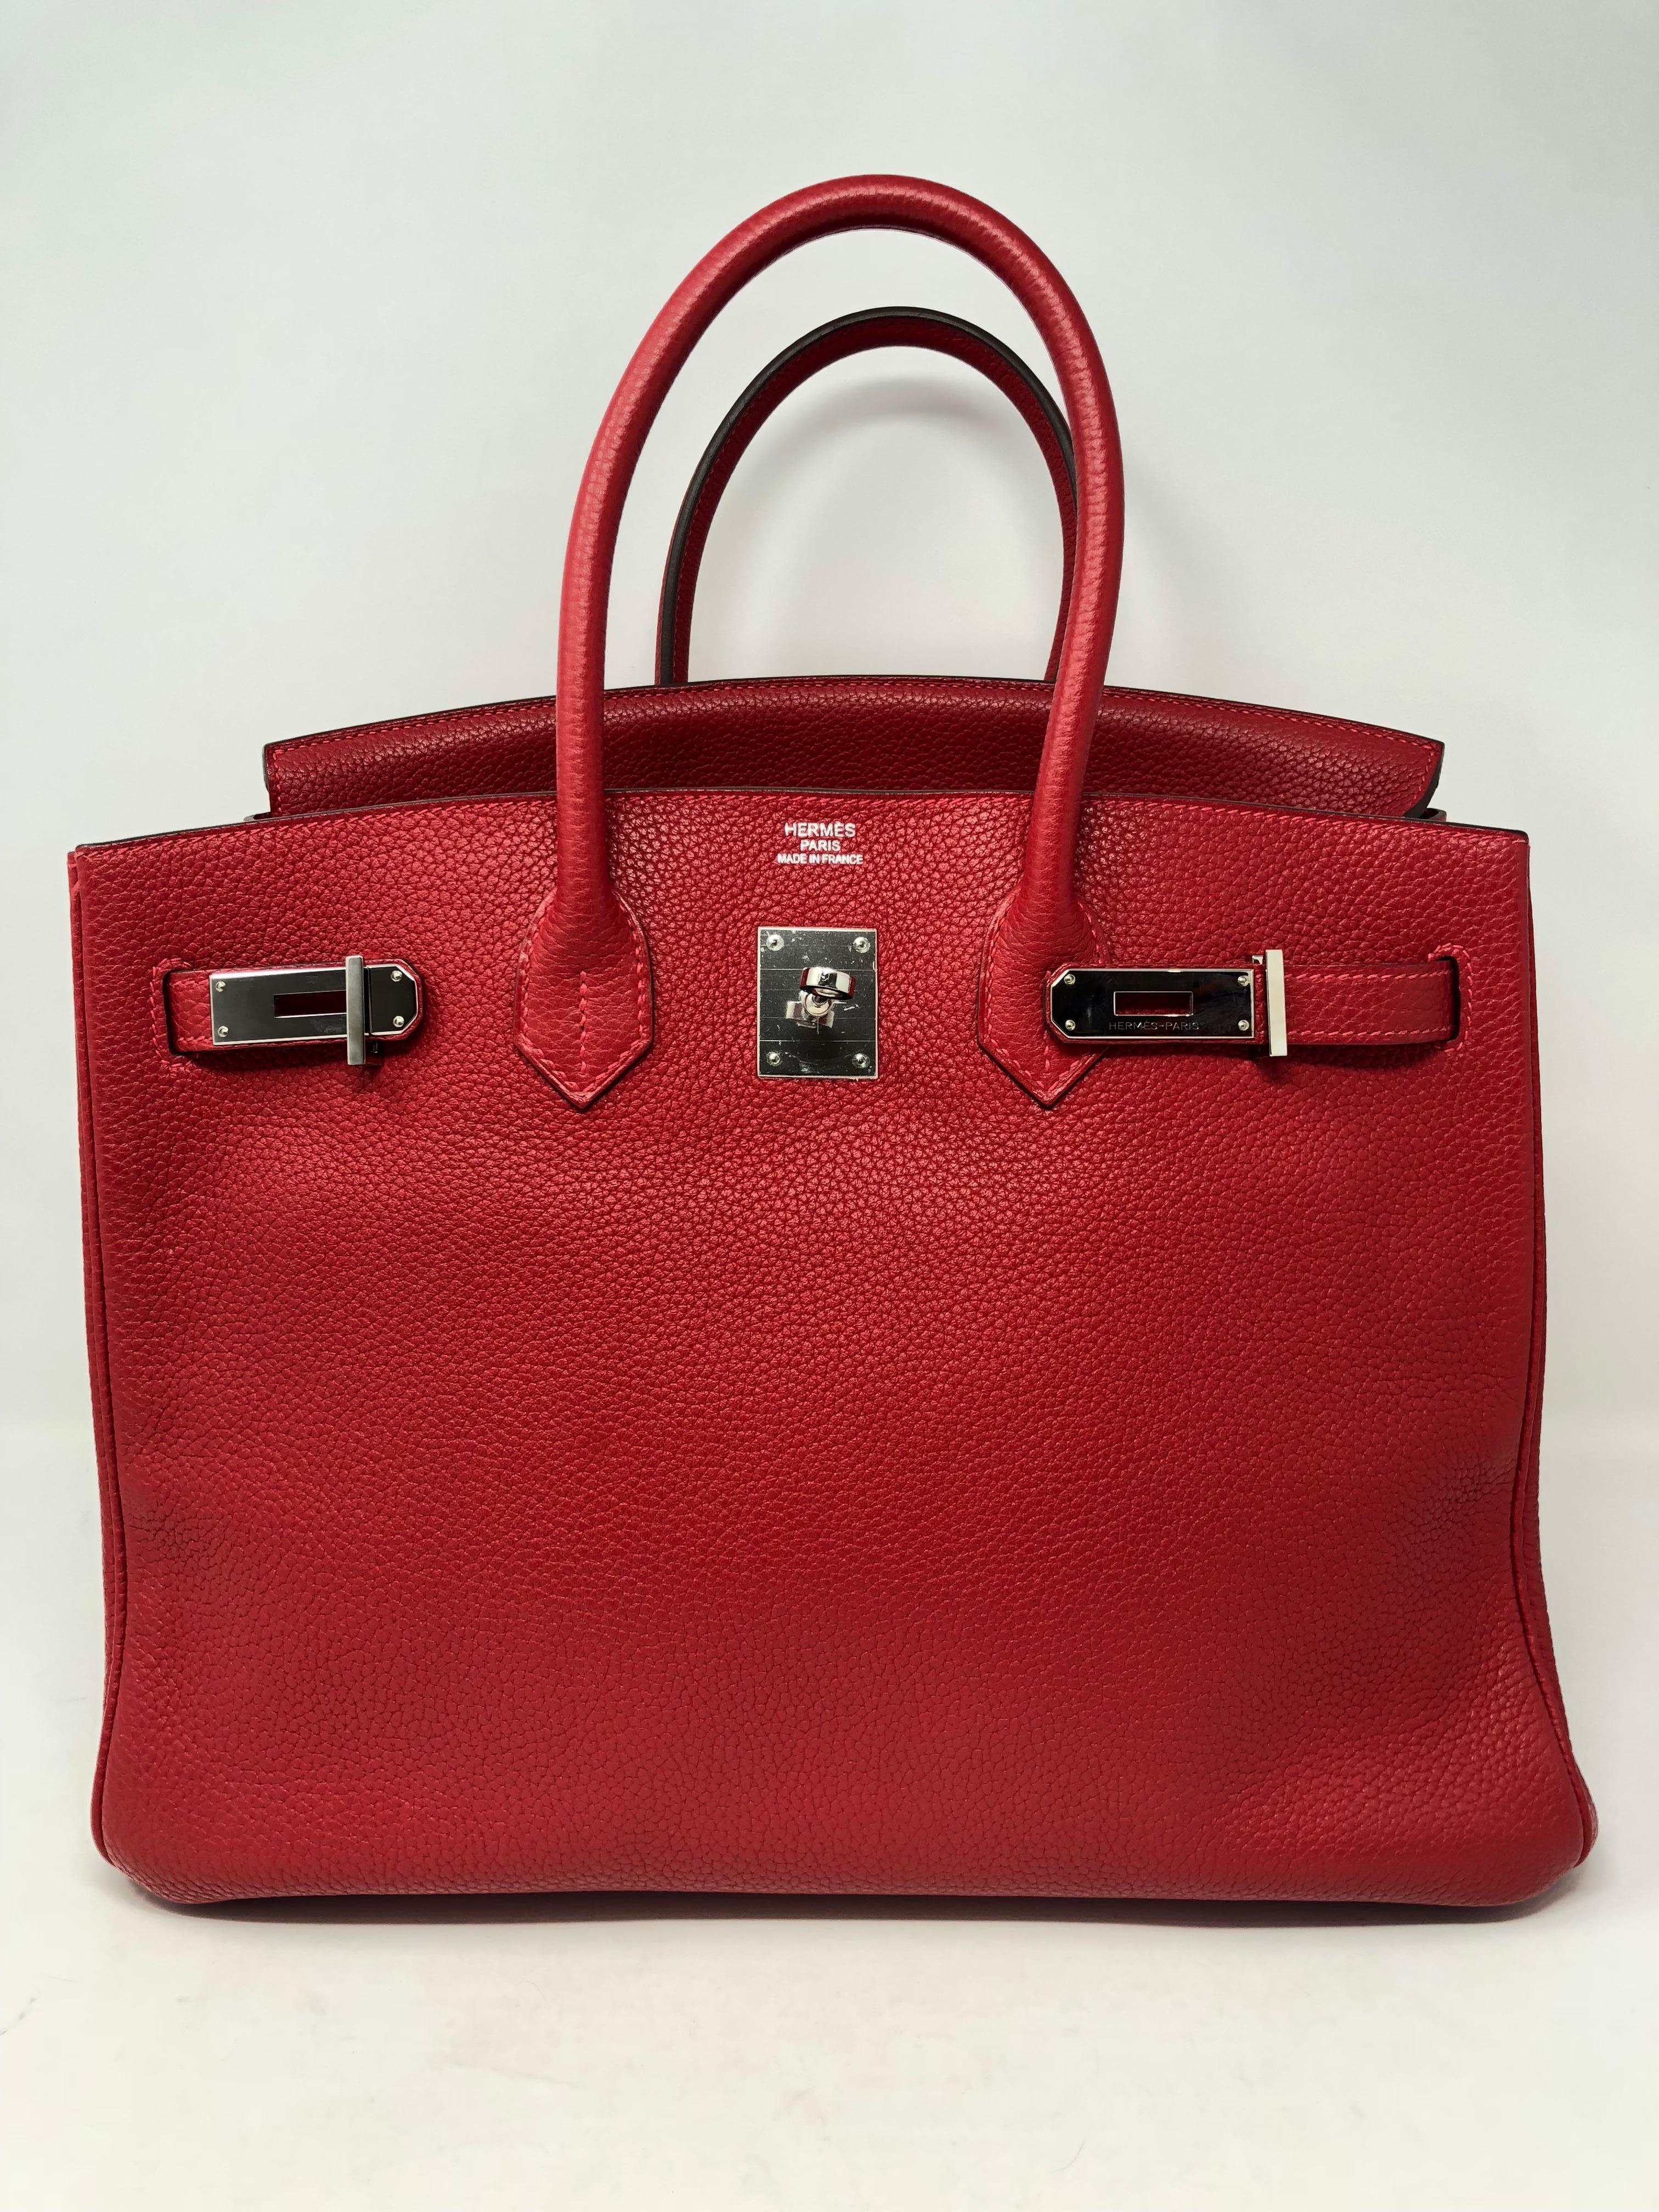 Hermes Birkin 35 Rouge Casaque with palladium hardware. Beautiful red color in clemence leather. Mint condition. Looks new. P square. Hard to find red color. Don't miss out on this one. Guaranteed authentic. 